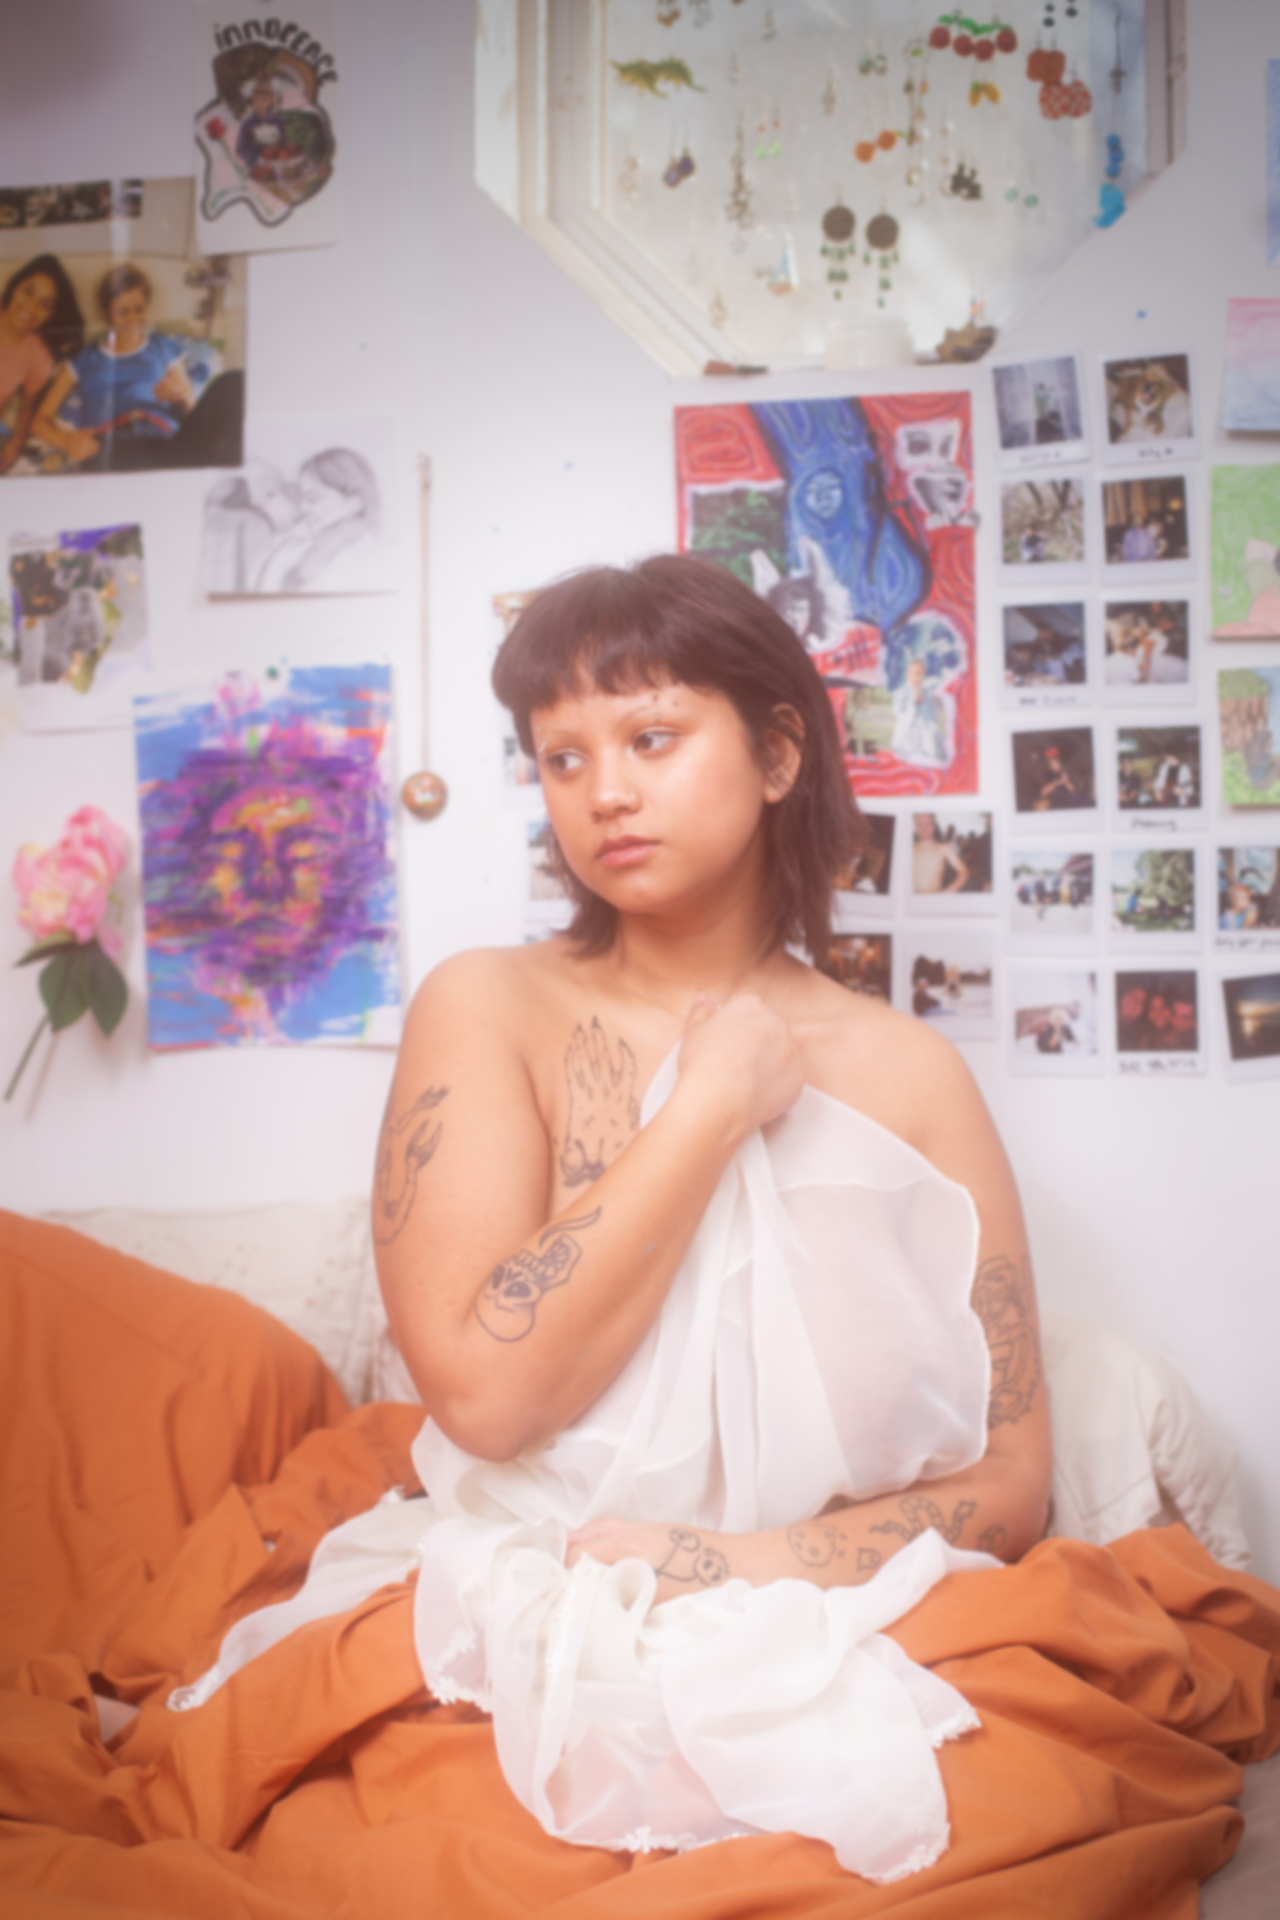 Maya sitting on her bed with orange sheets at the base of her body and a white silk sheet covering the front of her naked body. The walls of her room are covered in her artwork and pictures she took. She is looking off to the side.